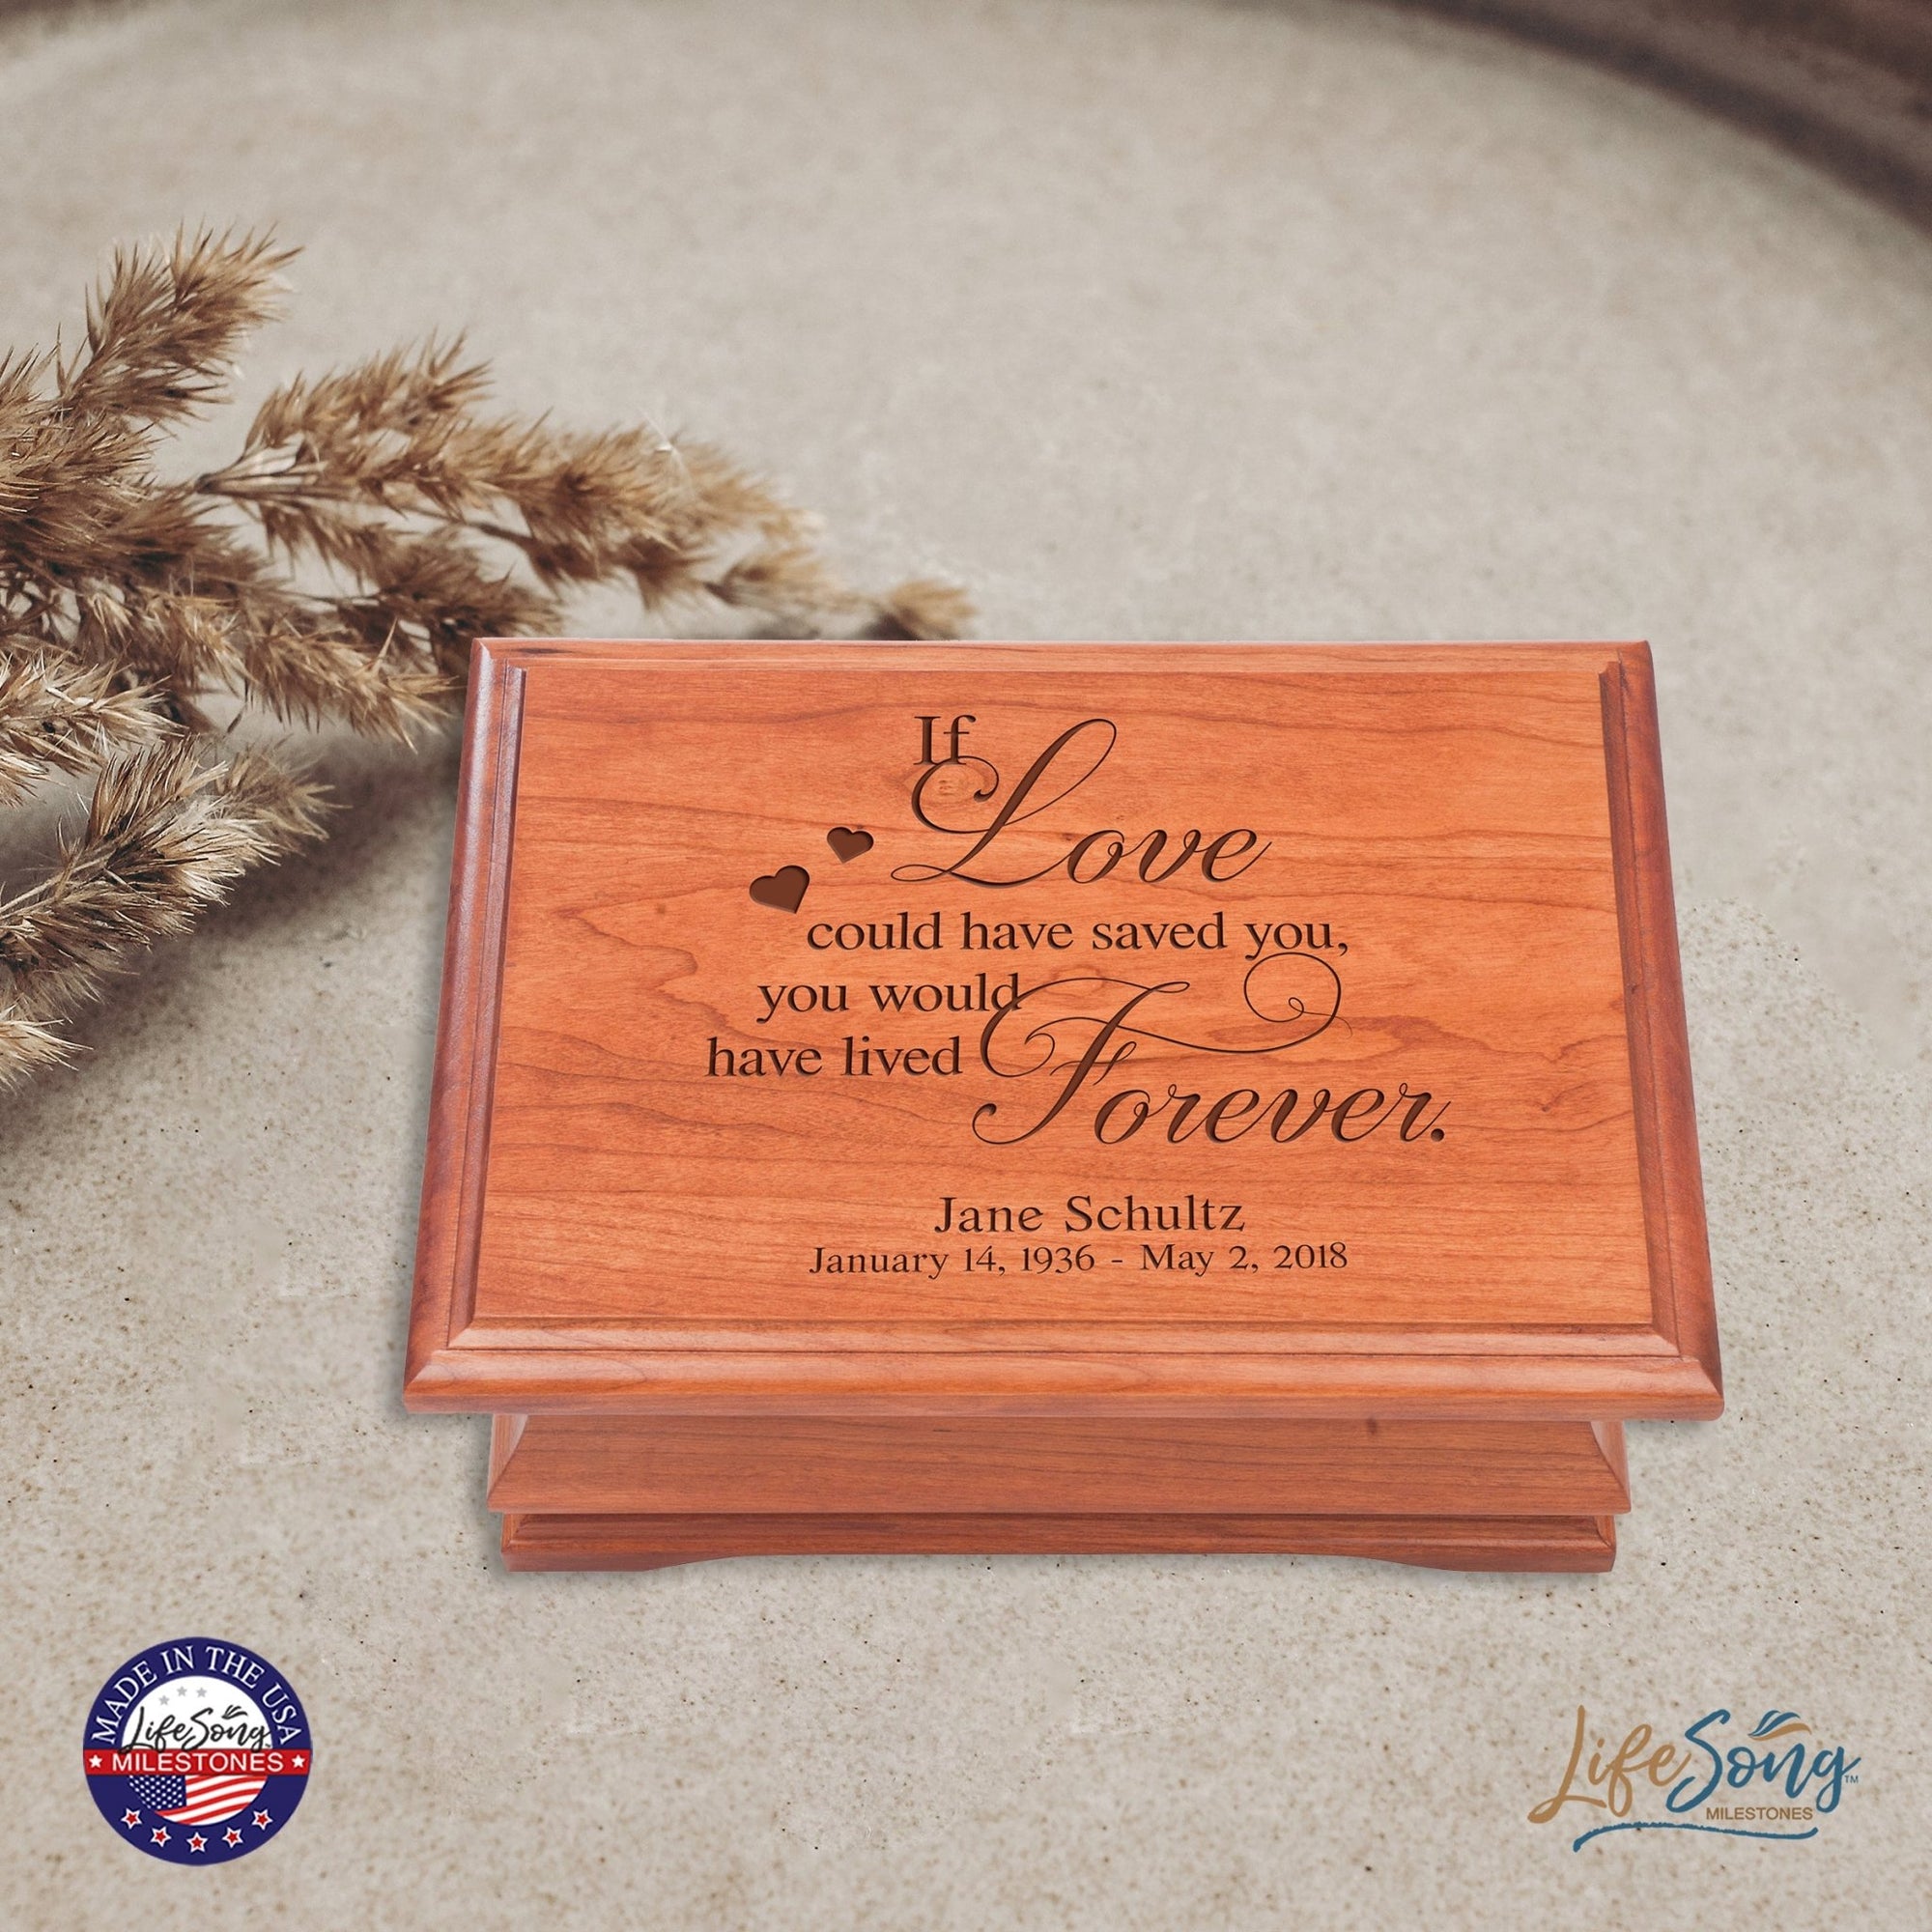 Personalized Wooden Memorial Jewelry Box Organizer 11.5x8.25 – If Love Could Have Saved - LifeSong Milestones